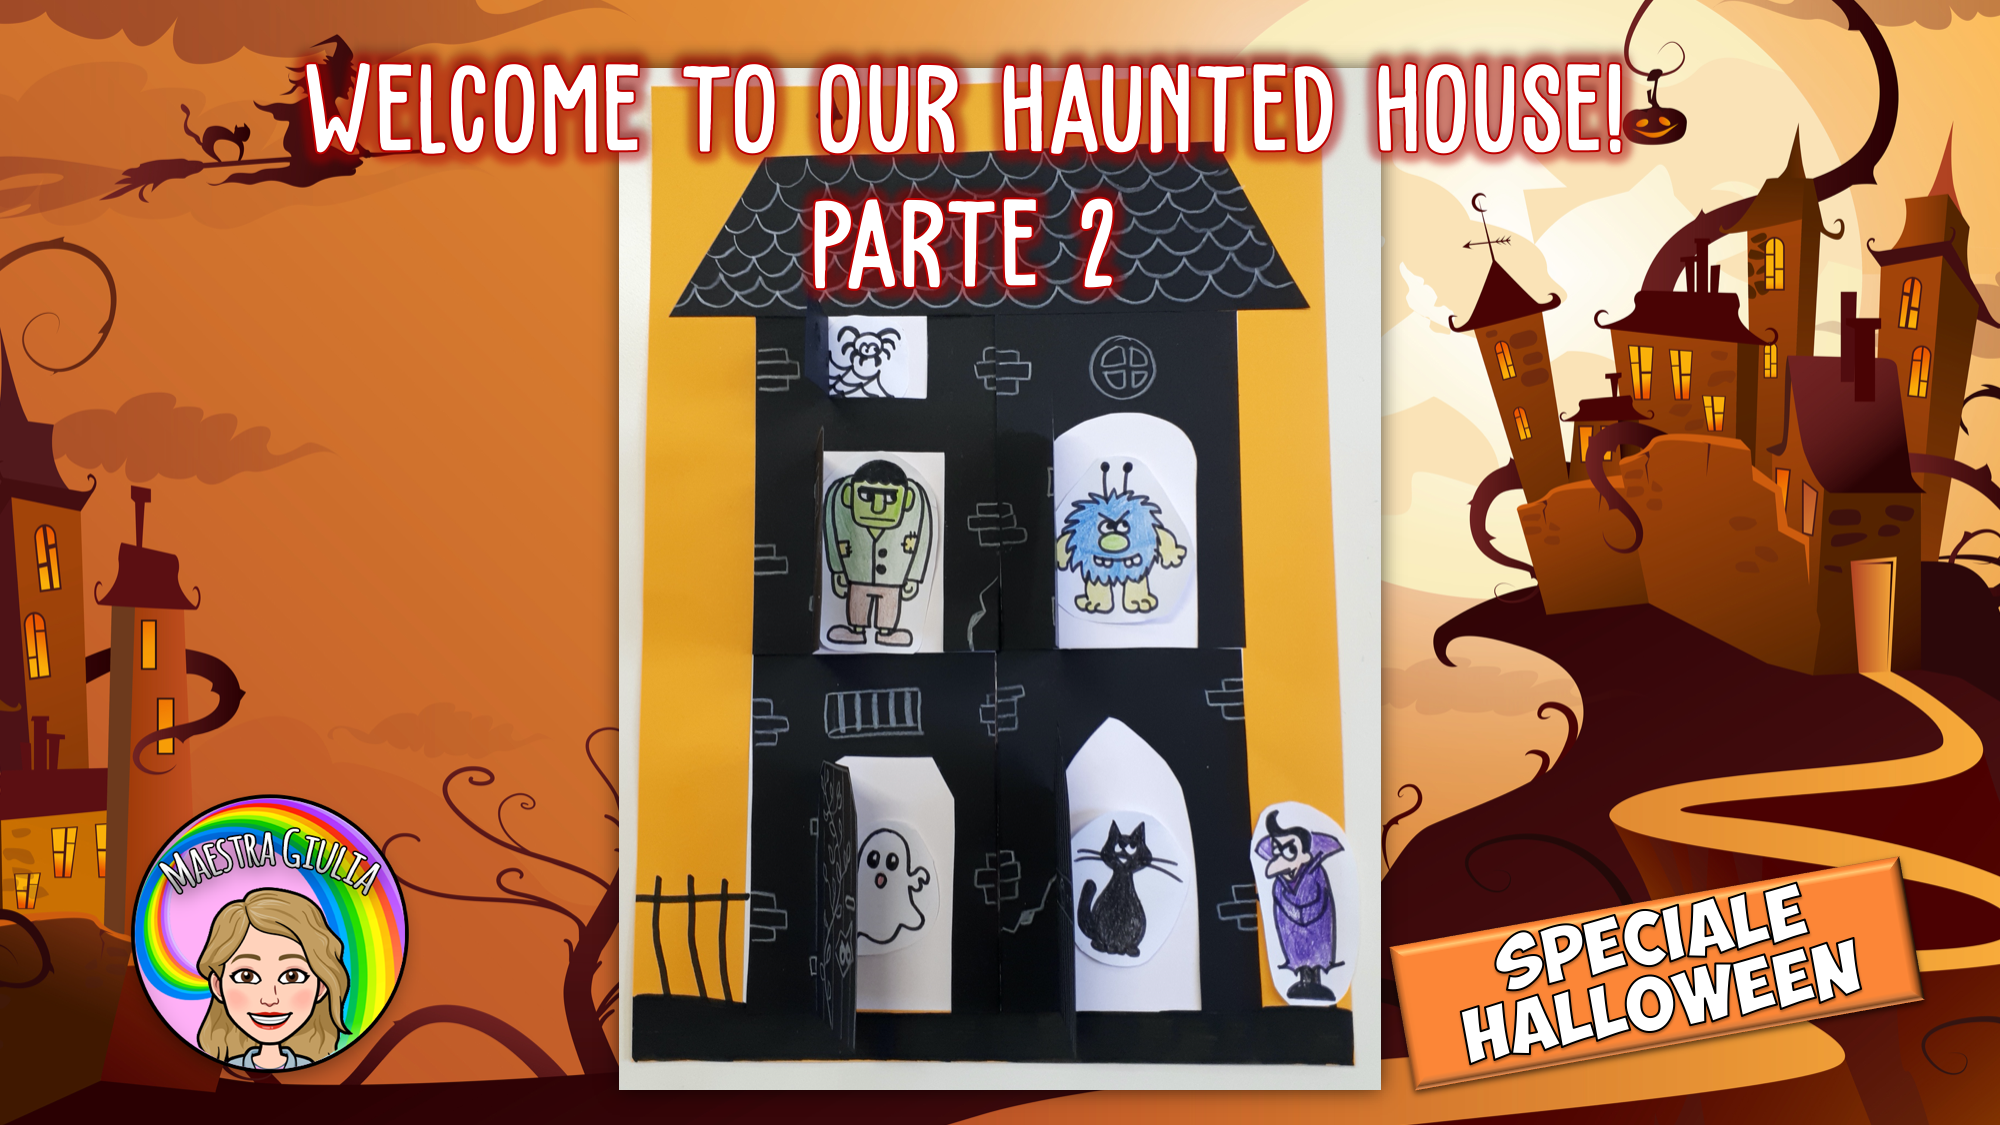 Welcome to our haunted house: seconda parte